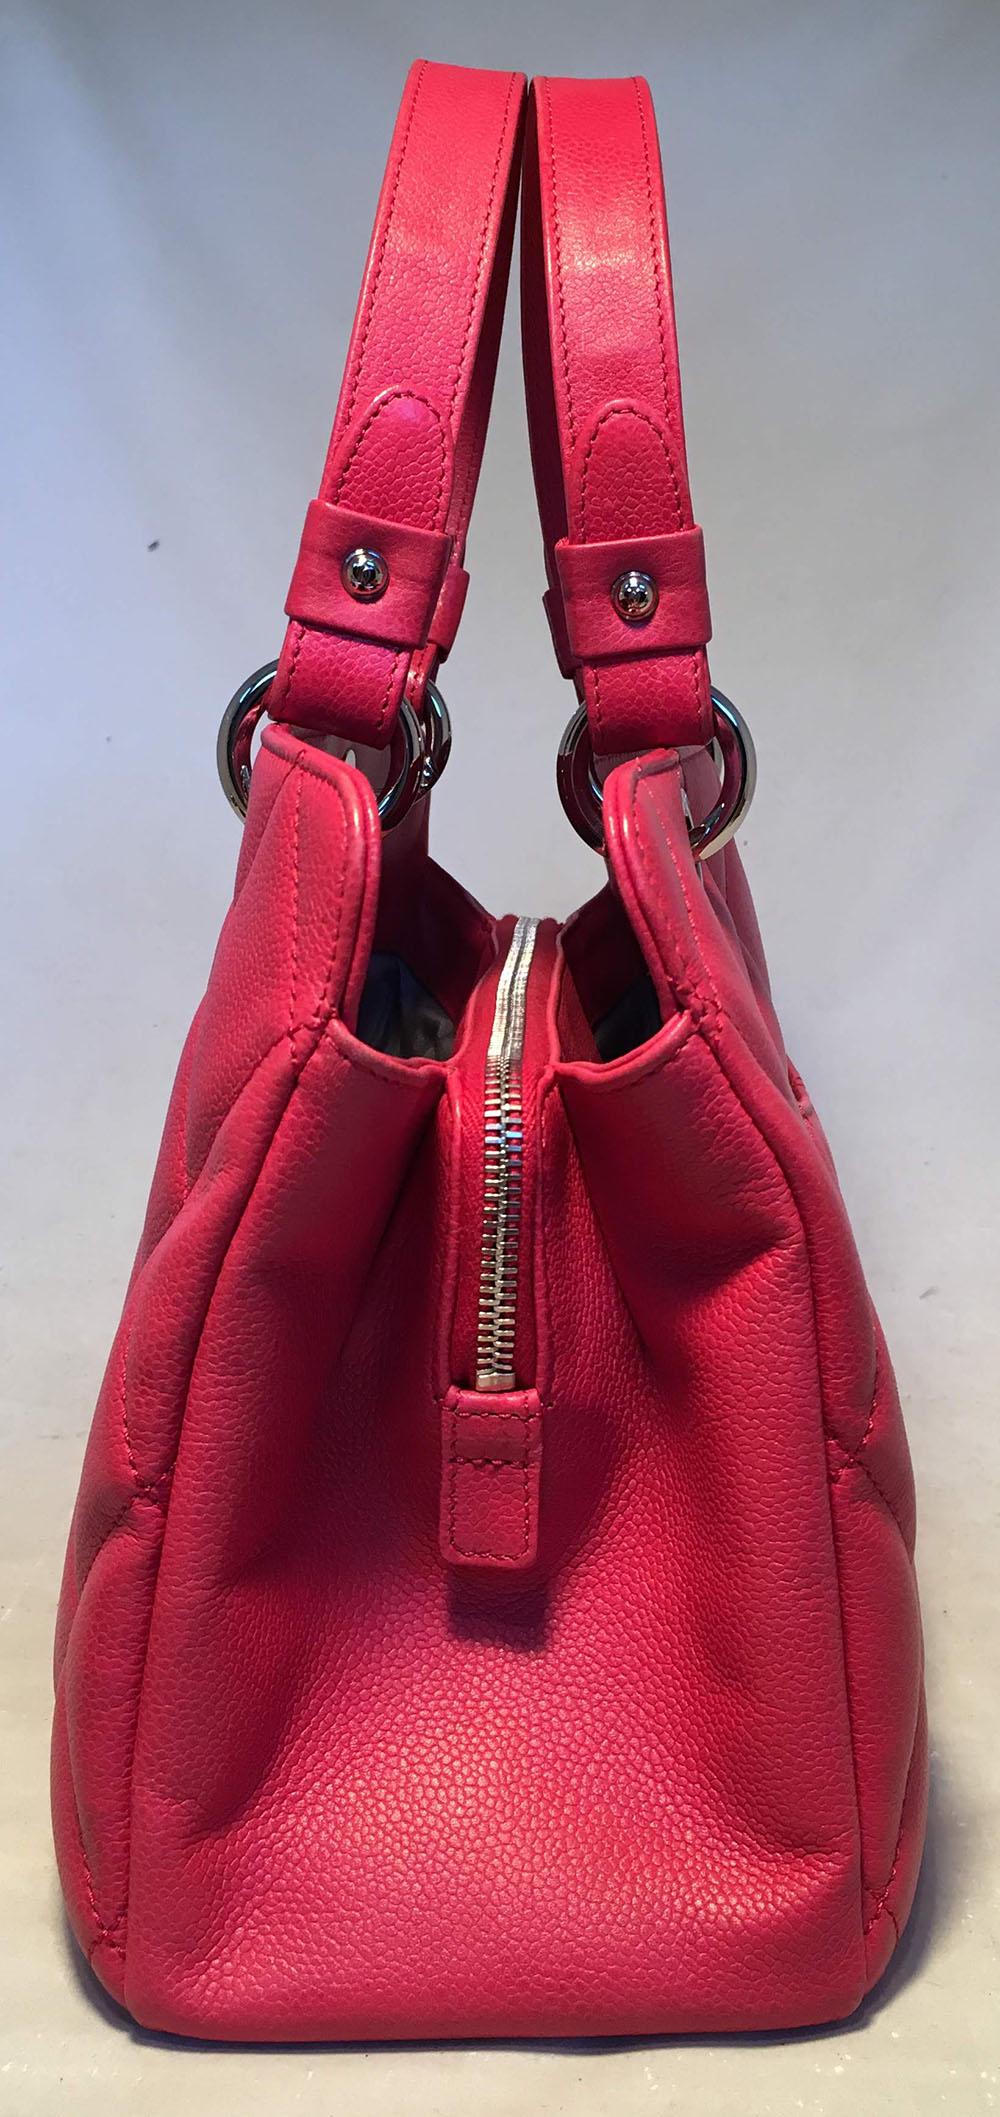 Chanel Dark Pink Caviar Quilted Grand Shopping Tote in excellent condition. Dark pink caviar quilted leather exterior trimmed with silver hardware. 3 separate interior storage compartments lined in grey nylon. Center zipped compartment. Back